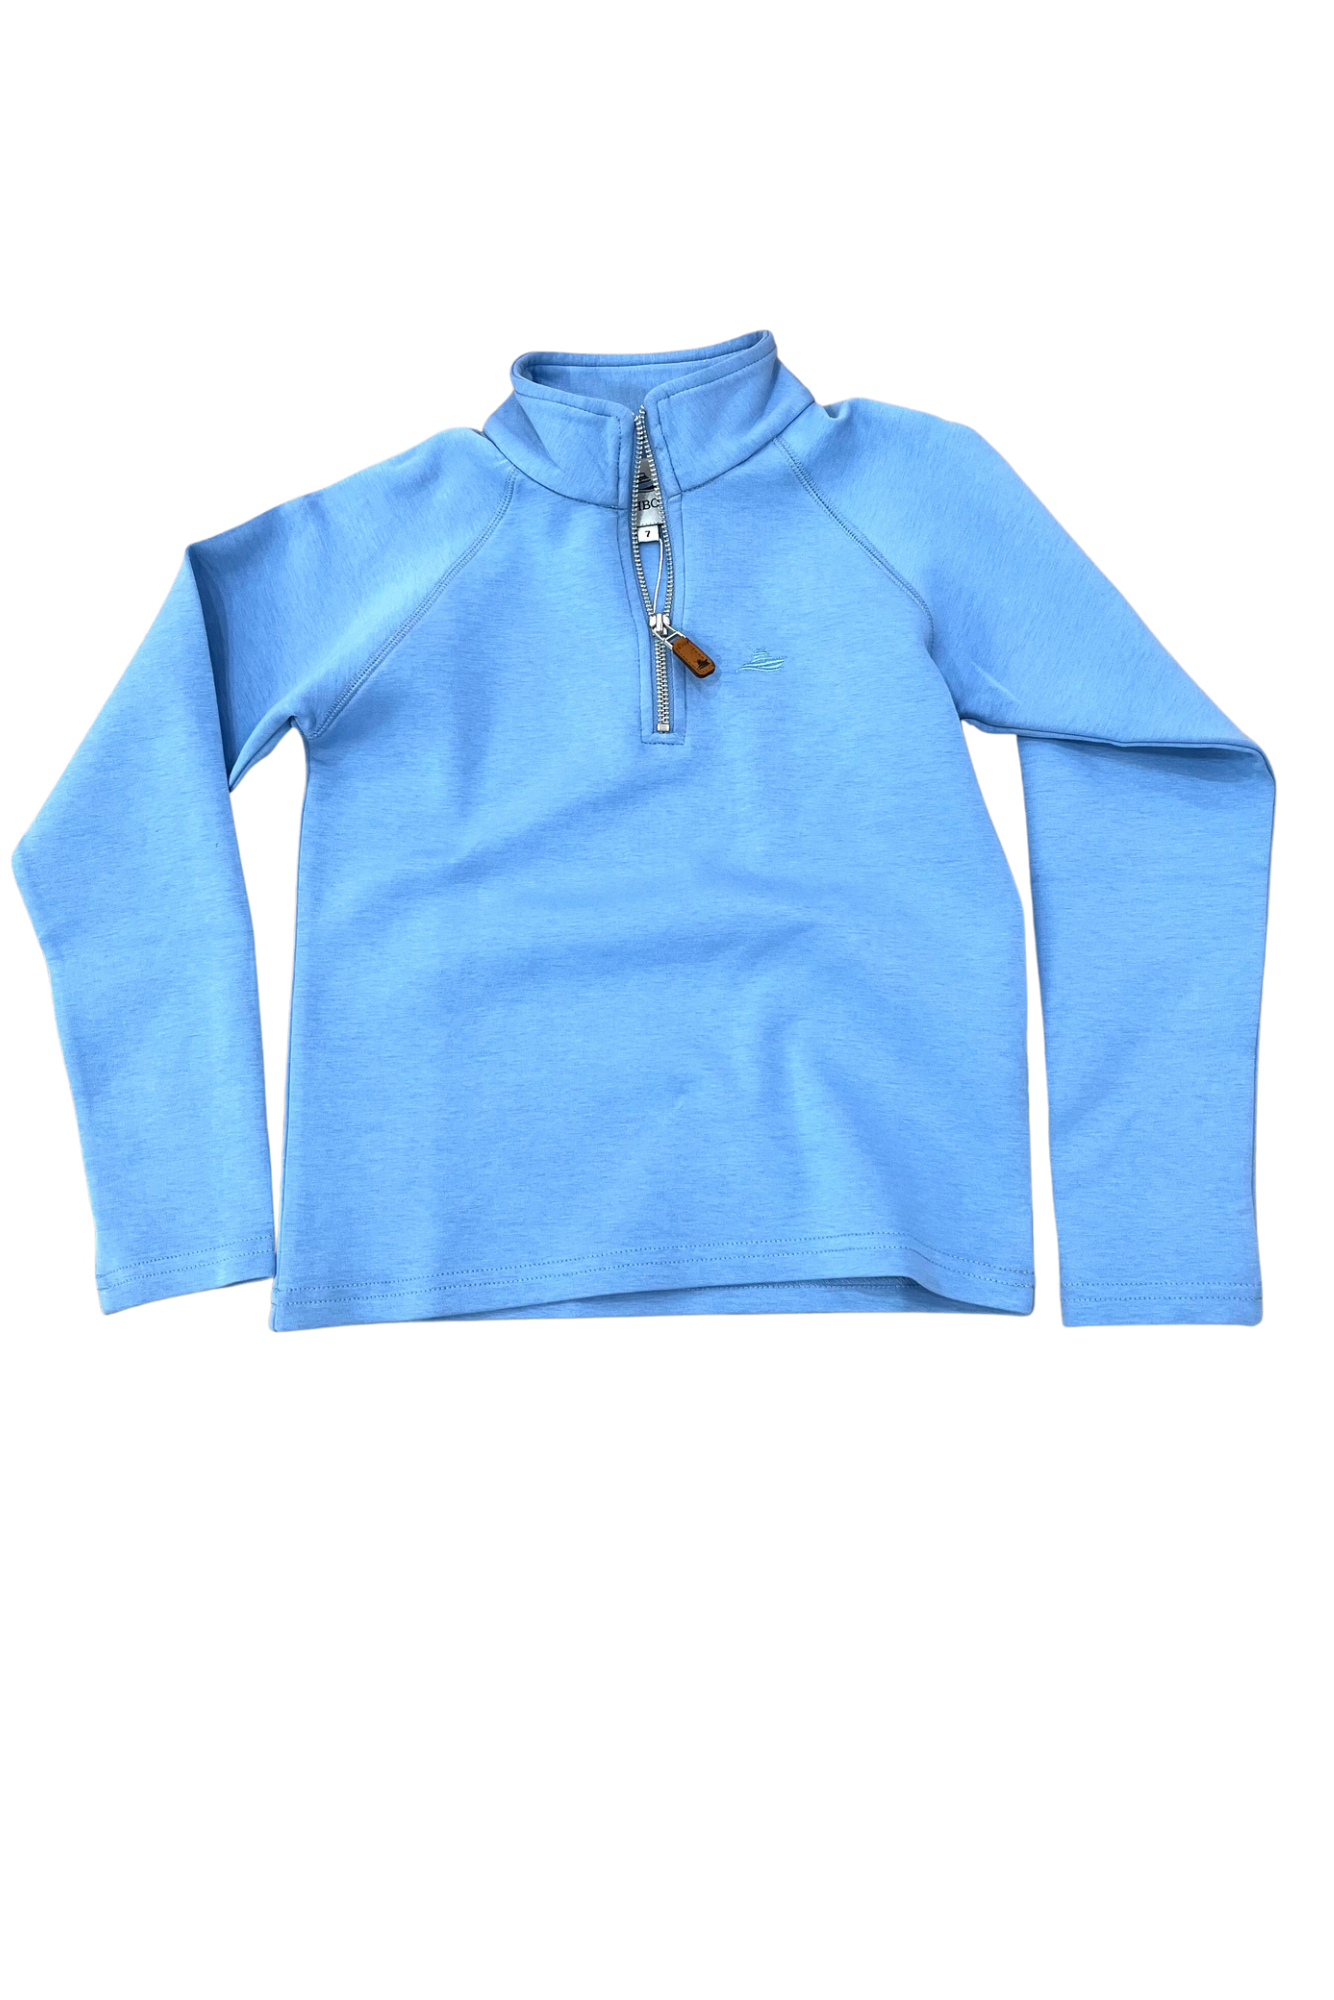 1/4 Zip Performance Pullover - Blue